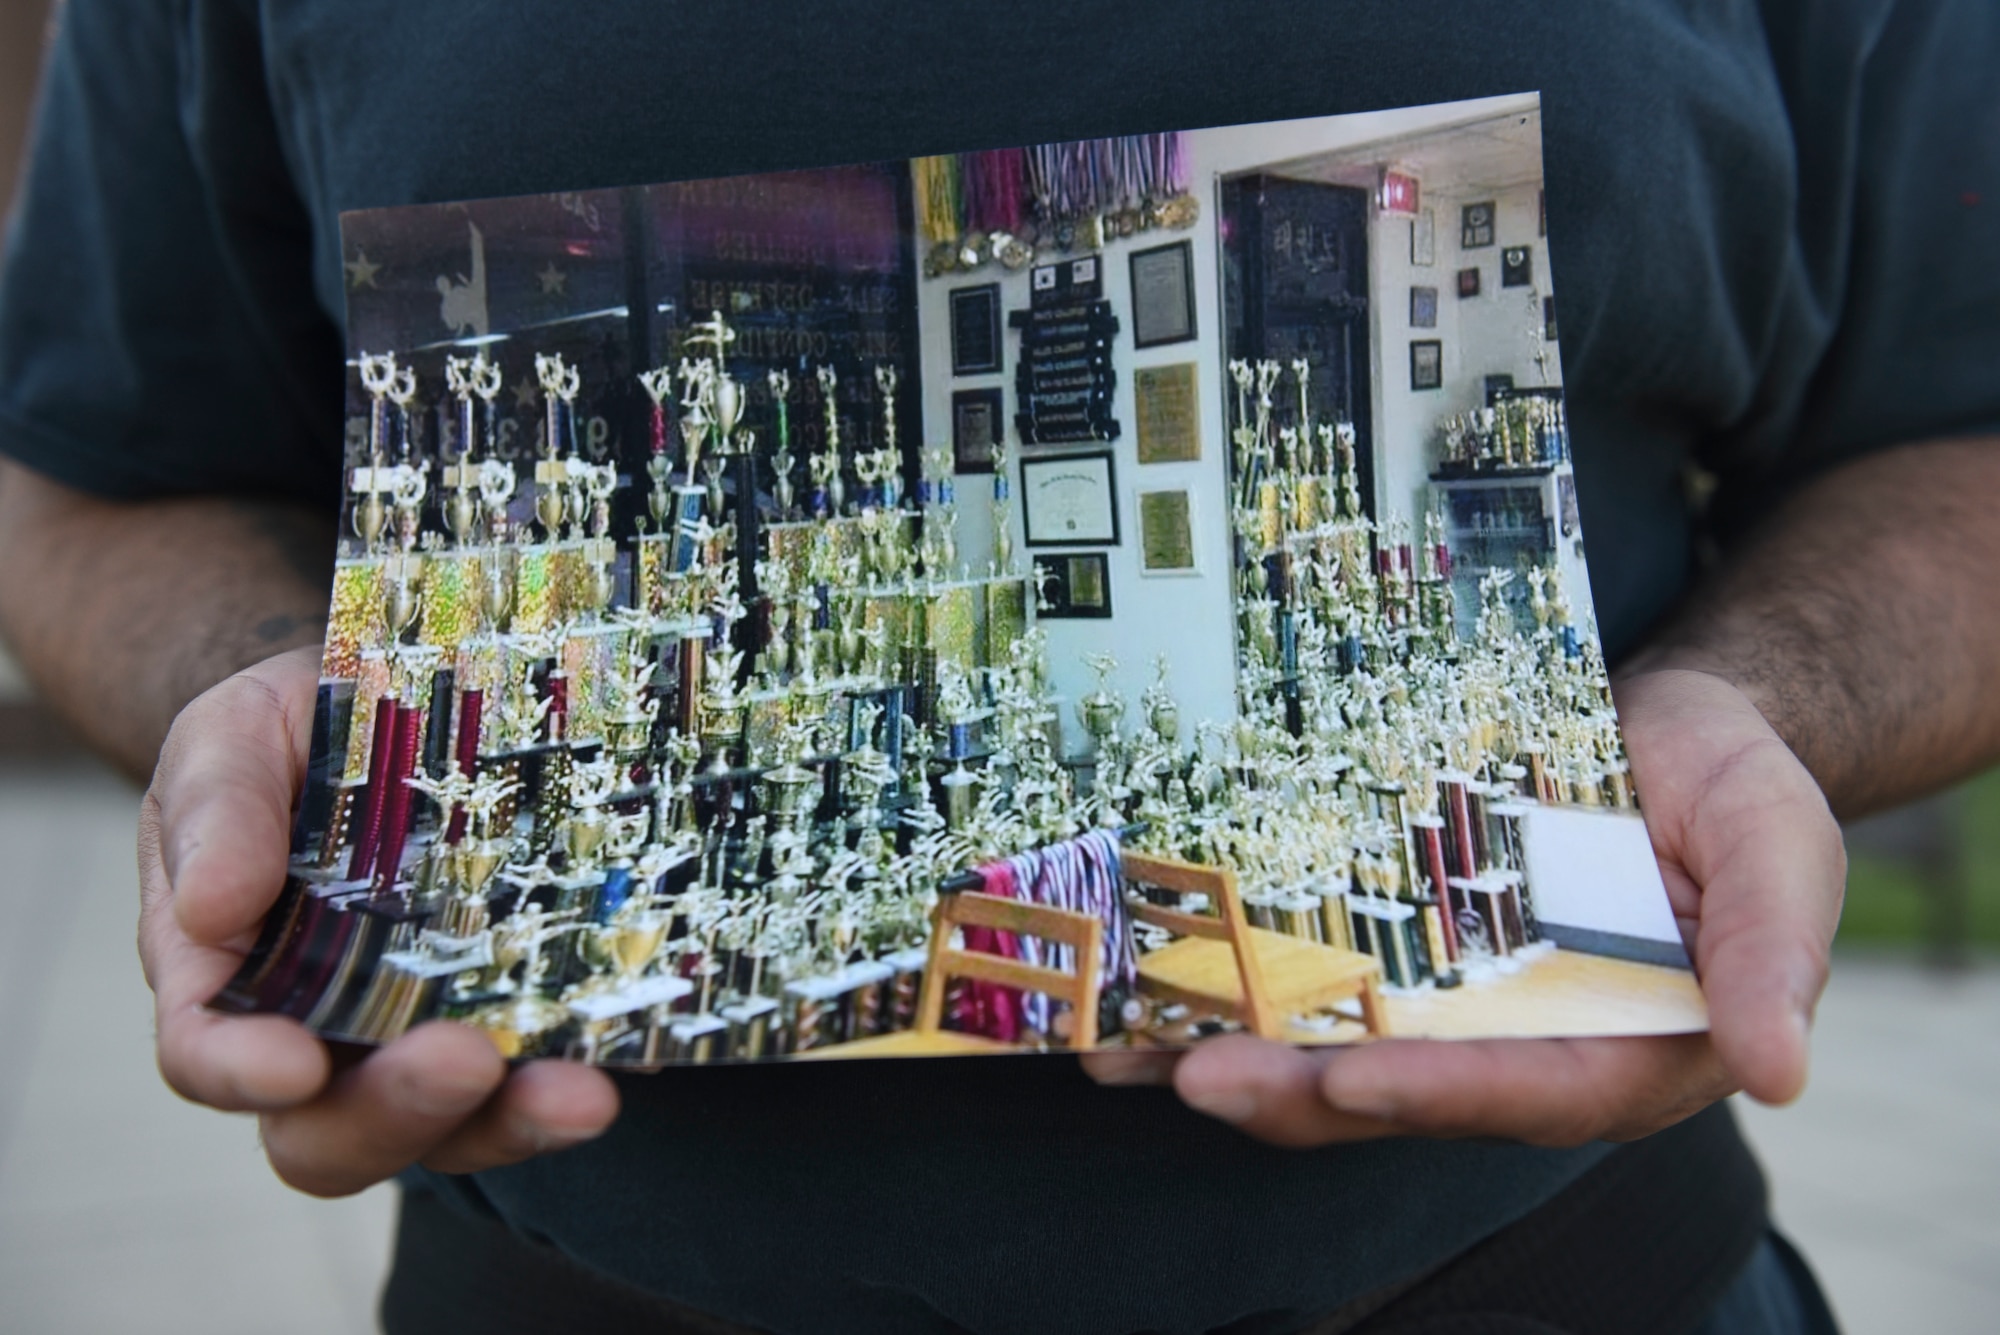 Staff Sergeant David Correa holds a photo of his collection of over 500 trophies.